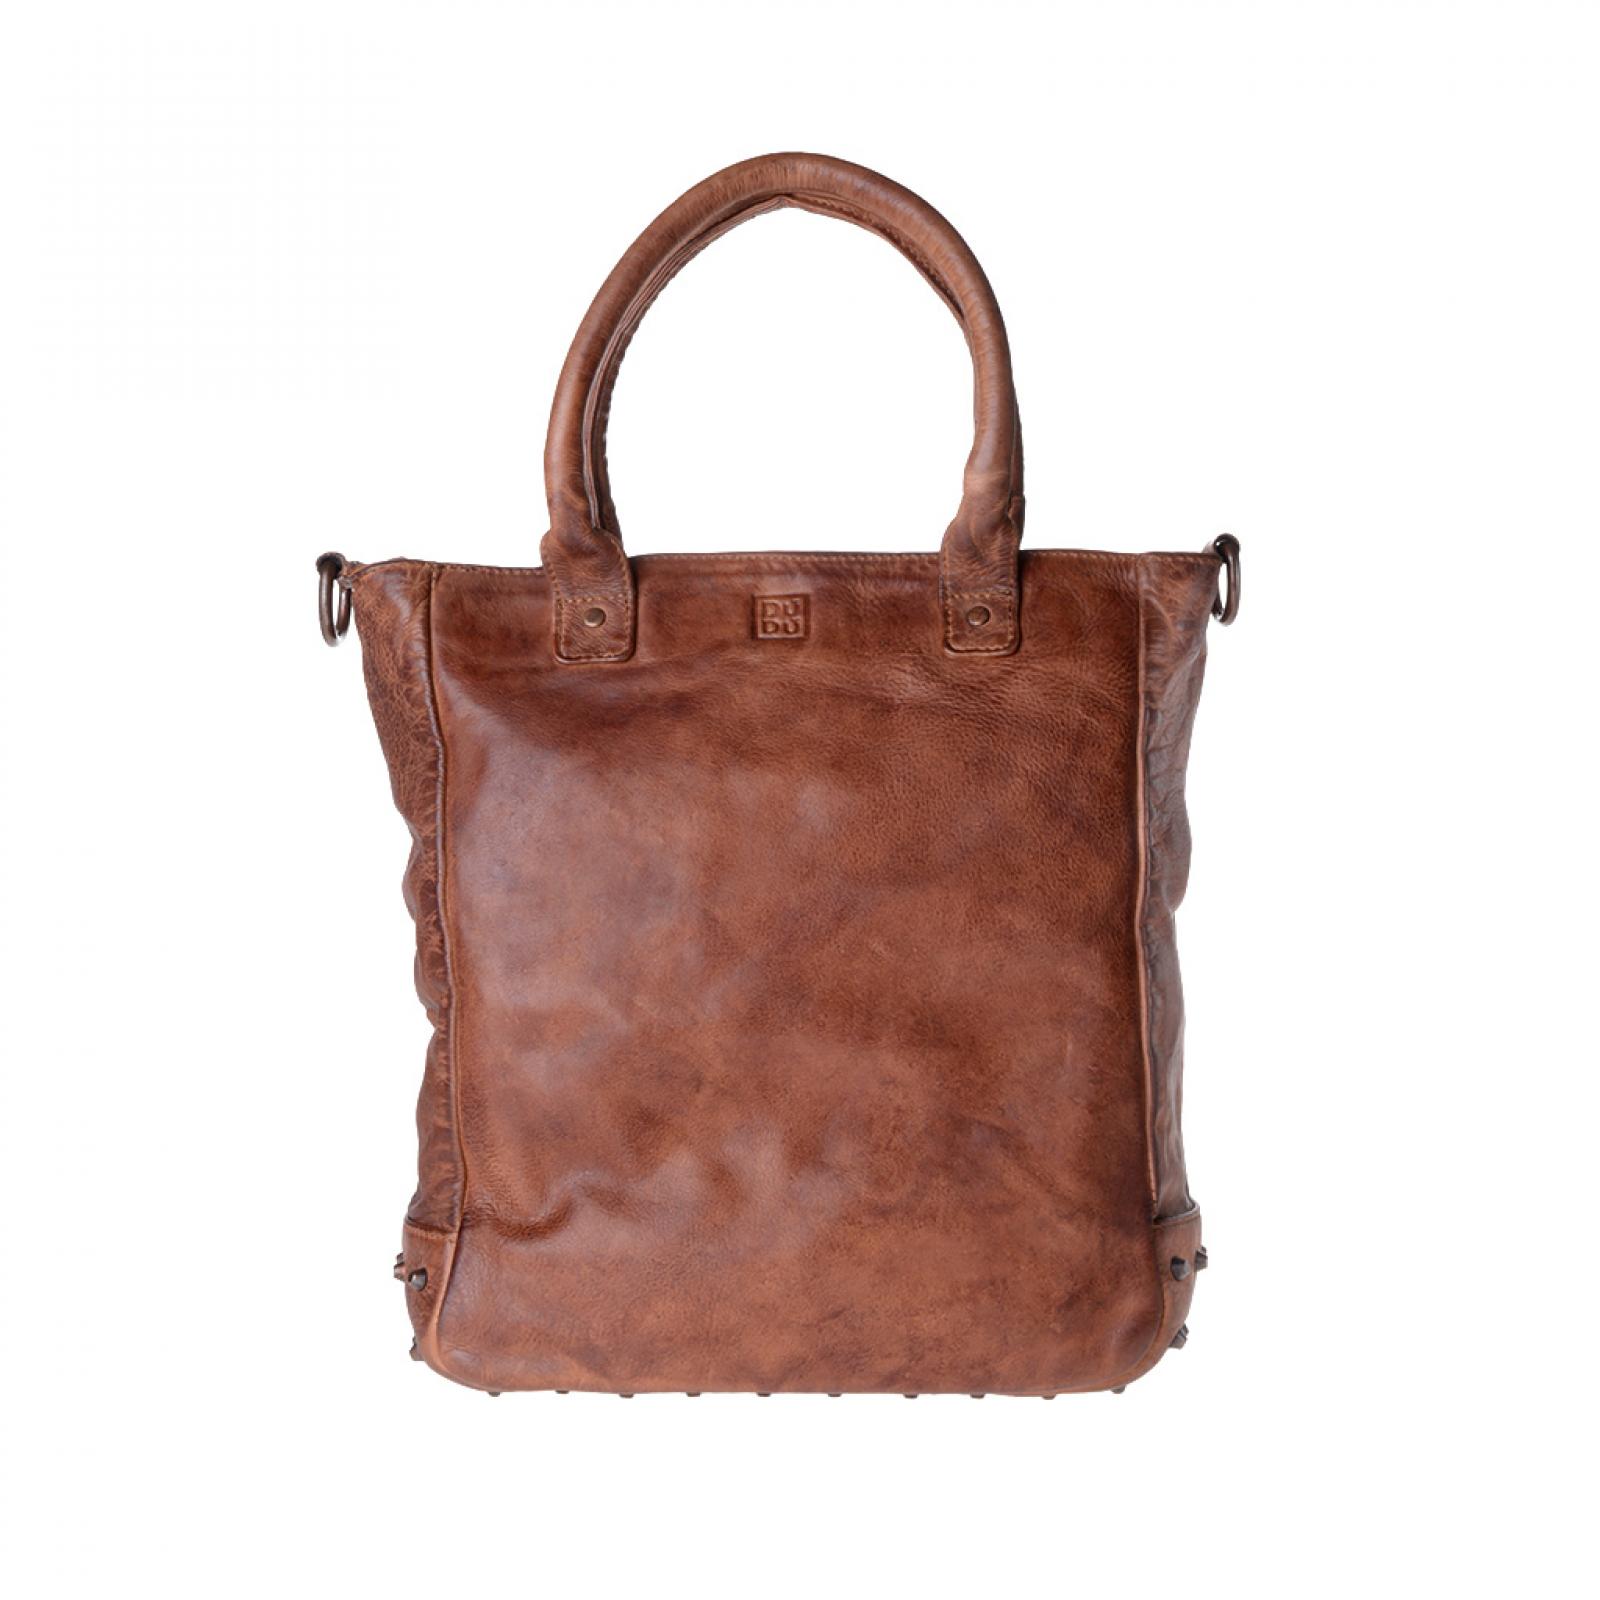 Collezioni  Donna  Timeless - Bag - Onyx Brown